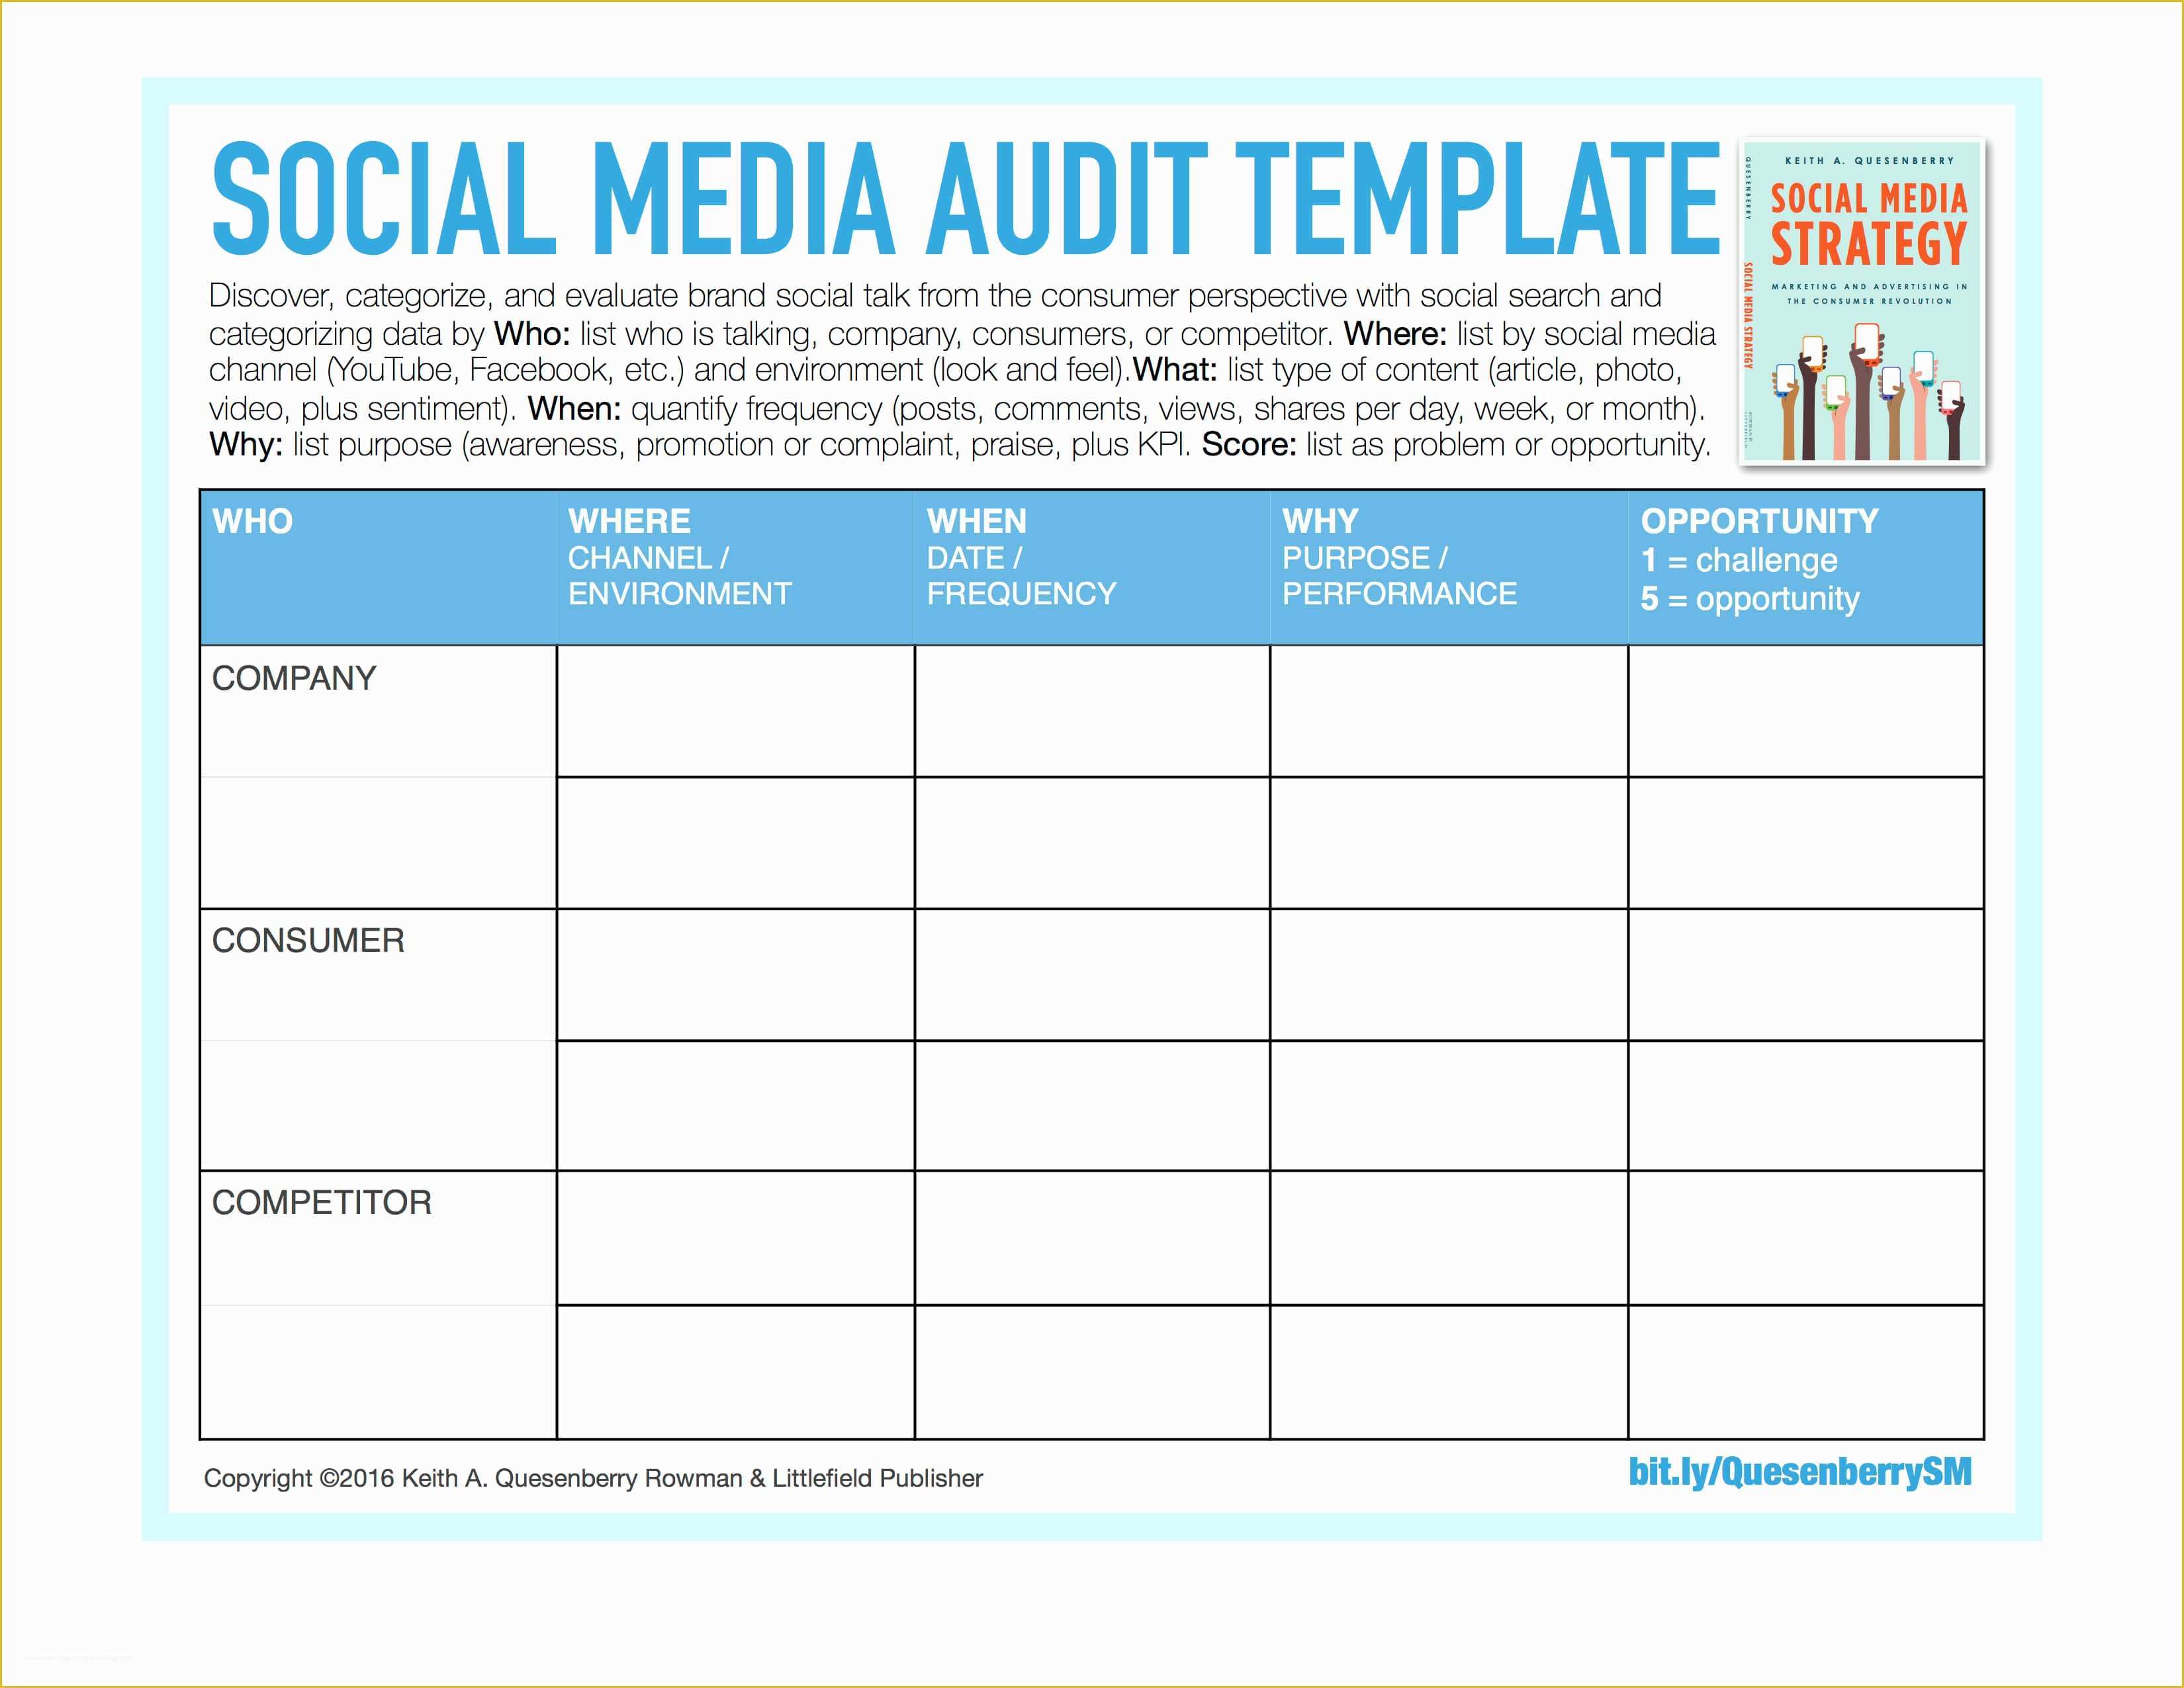 Free social Media Video Template Of social Media Templates Keith A Quesenberry